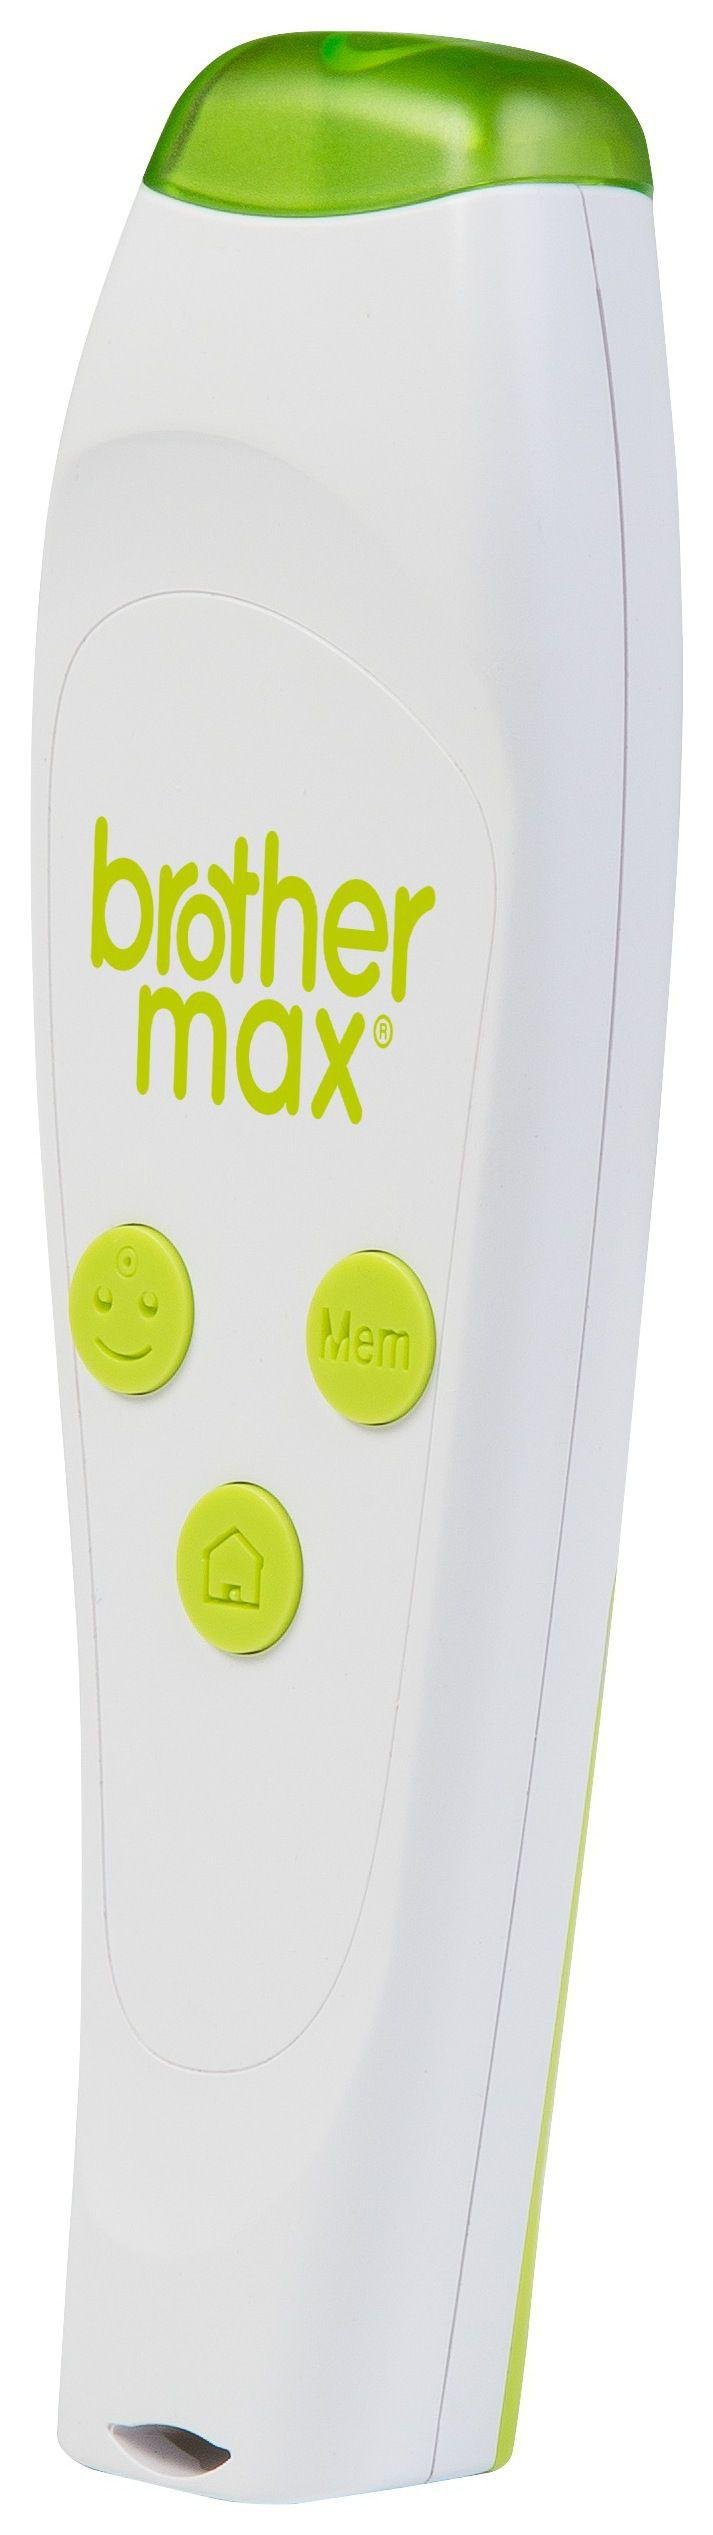 Brother Max 6 in 1 Projection Non Contact Thermometer. review